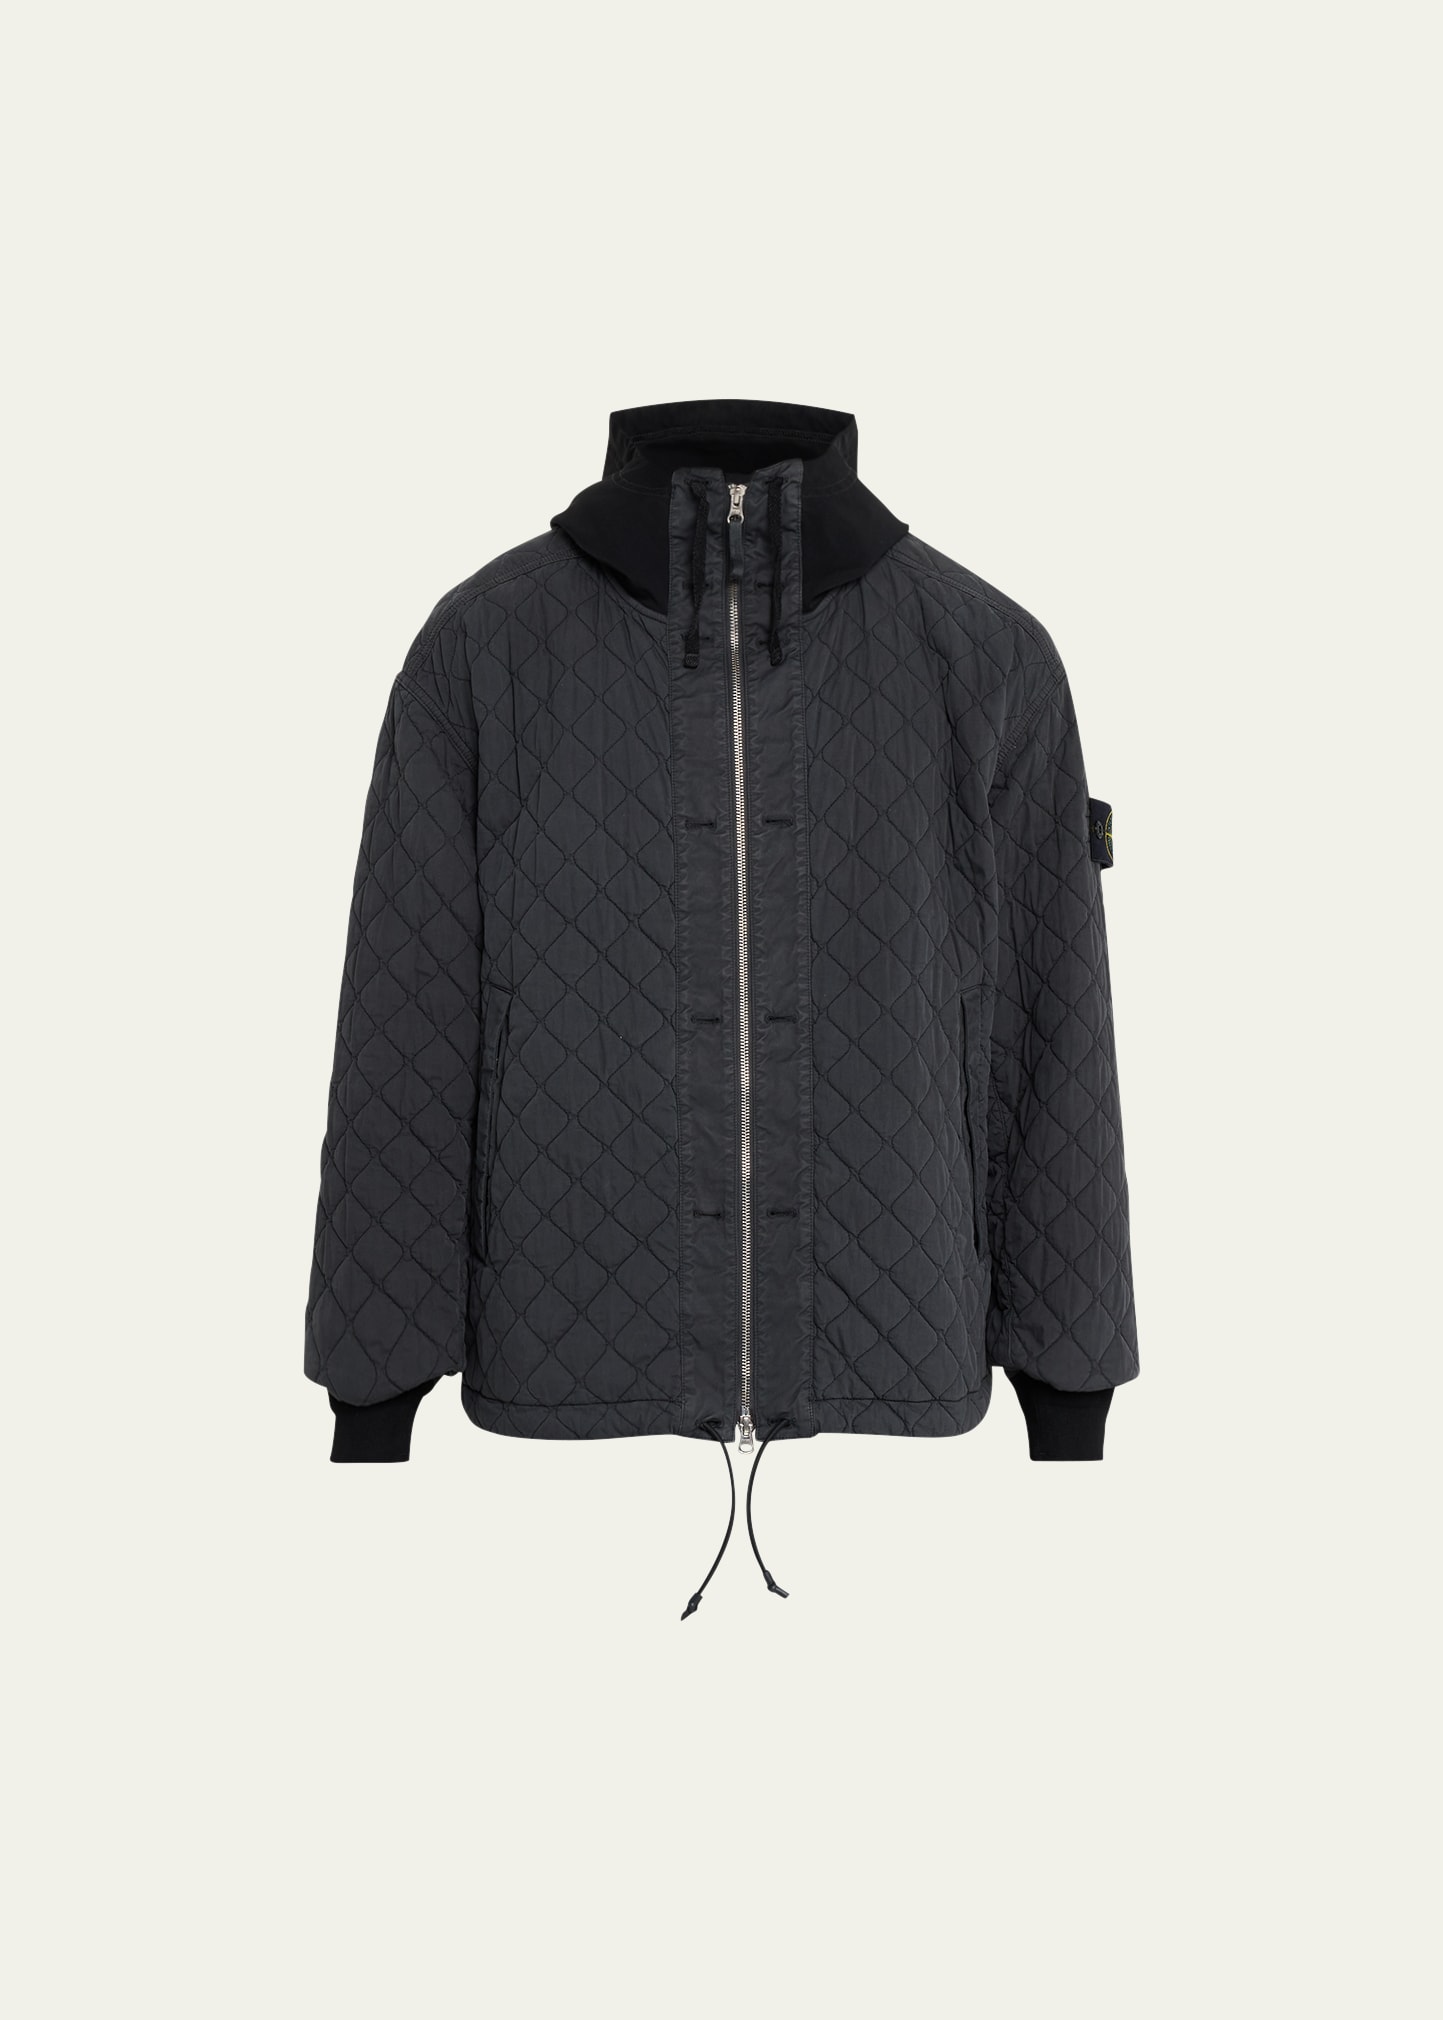 STONE ISLAND MEN'S DIAMOND QUILTED HOODED JACKET